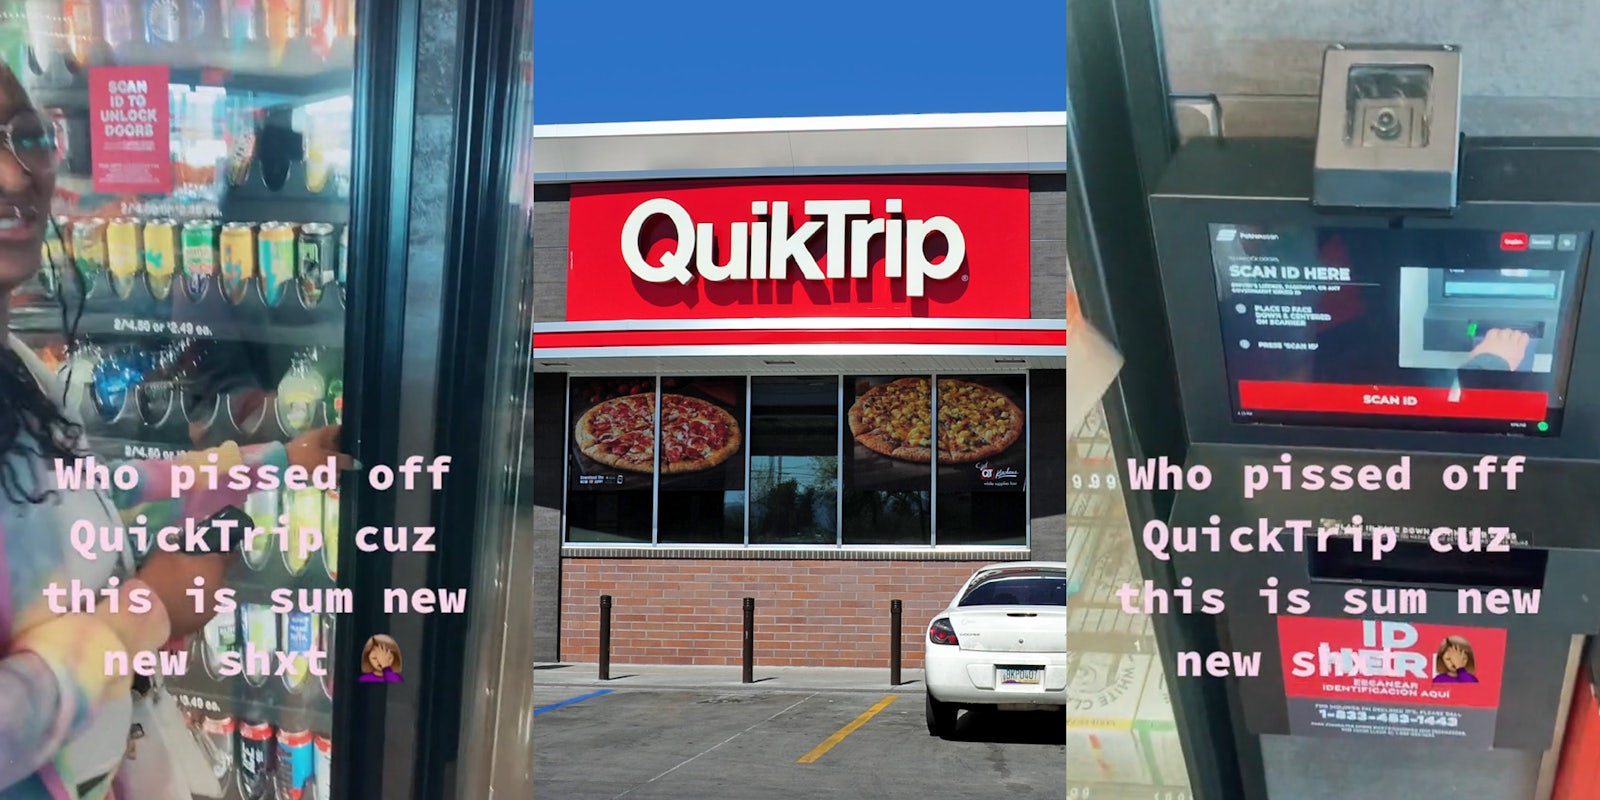 QuikTrip alcohol fridge with sticker on glass 'SCAN ID TO UNLOCK DOORS' with caption 'Who pissed off QuikTrip cuz this is sum new new shxt' (l) QuikTrip sign on building (c) QuikTrip interior with ID scanner with caption 'Who pissed off QuikTrip cuz this is sum new new shxt' (r)